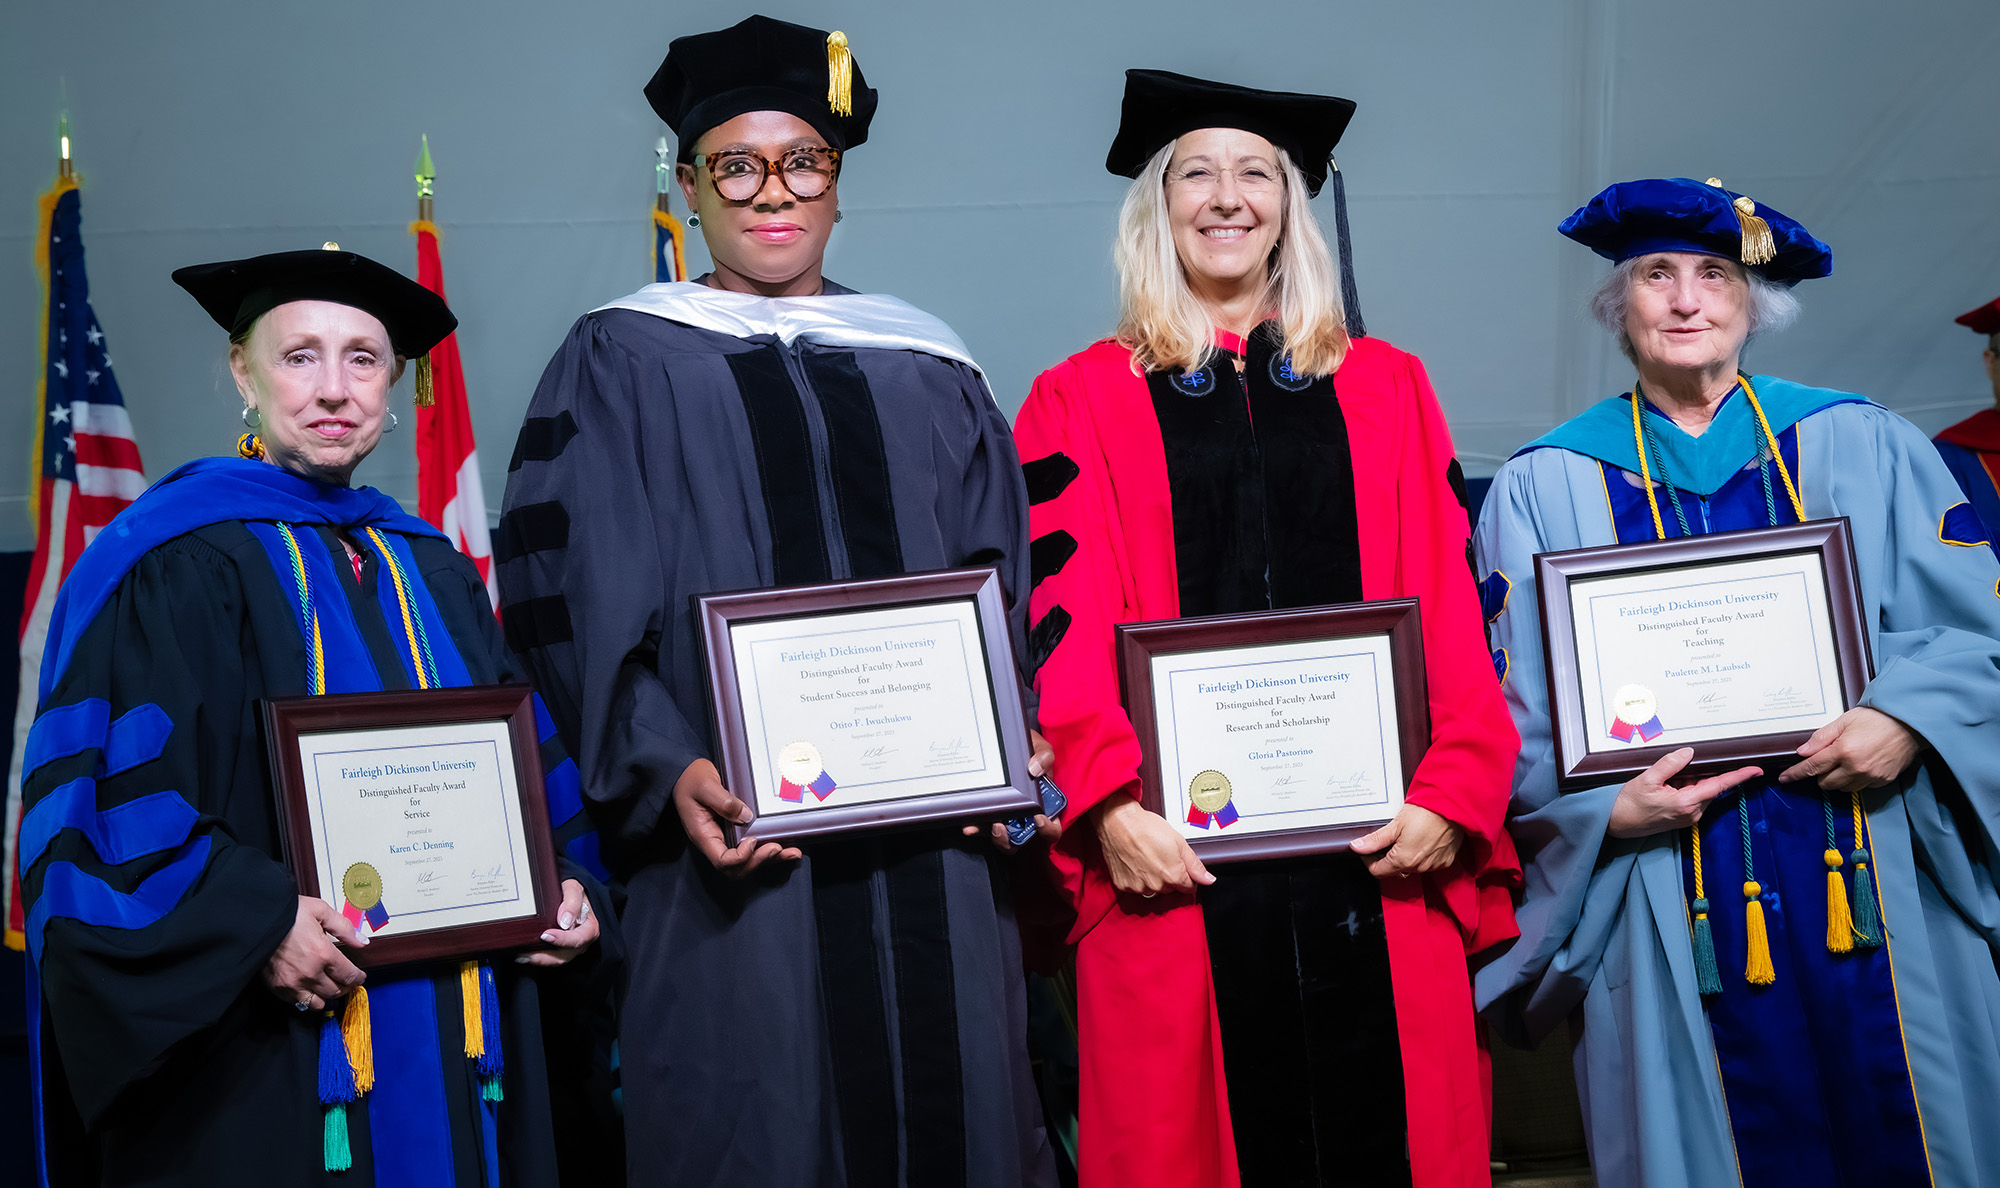 Four women dressed in academic regalia hold awards and pose for a photo.